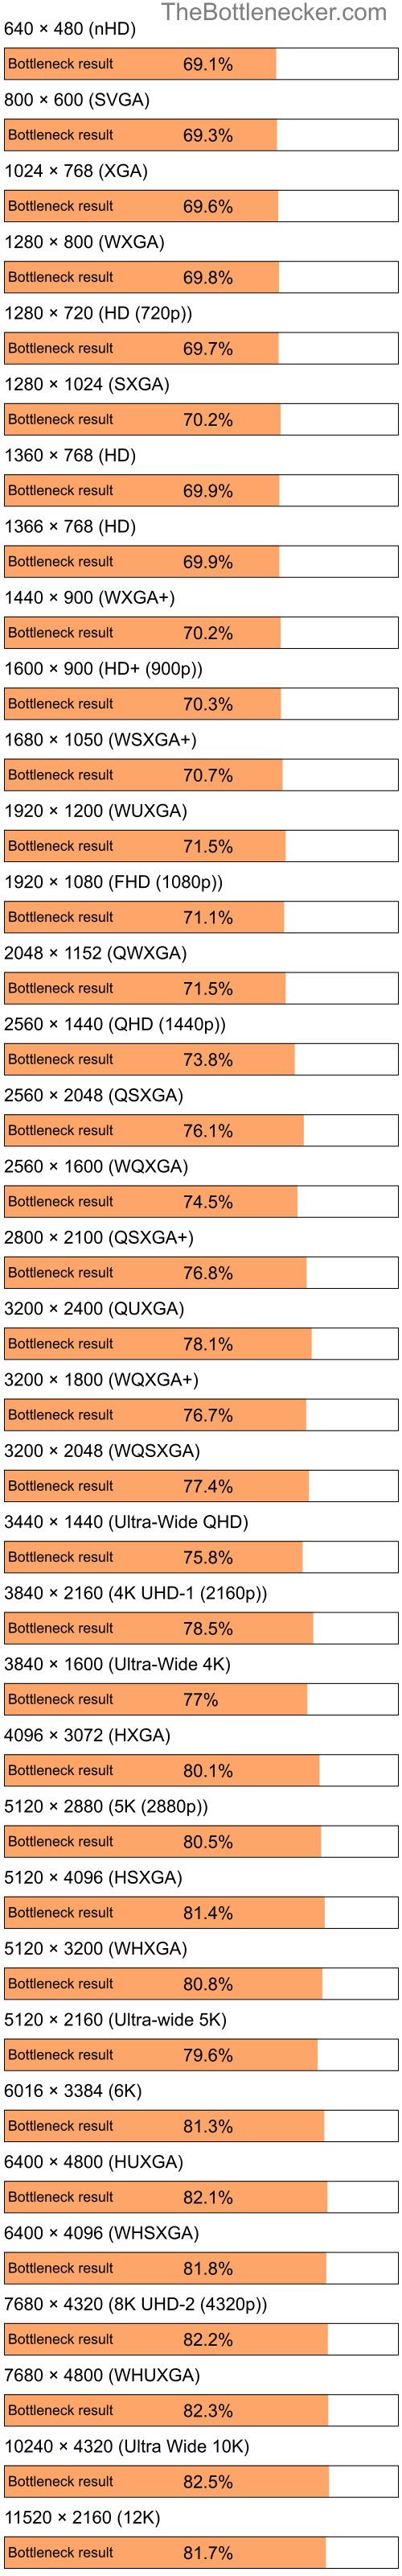 Bottleneck results by resolution for Intel Celeron M and AMD Radeon X1300 in General Tasks